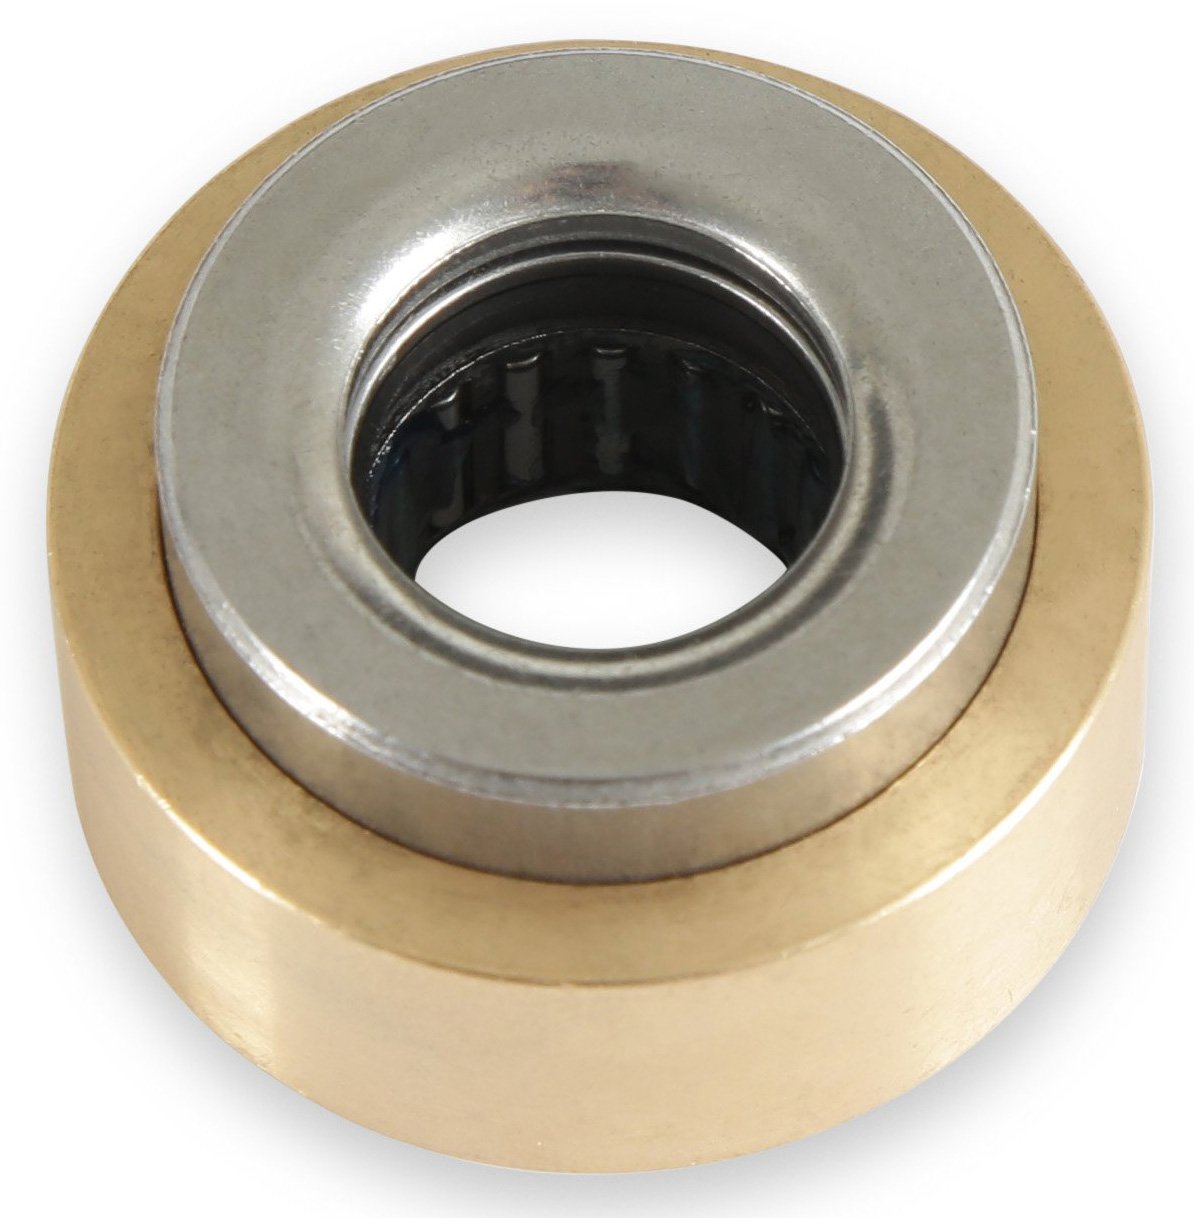 Adapter Pilot Roller Bearing for Small Block Ford to GM Manual Transmissions